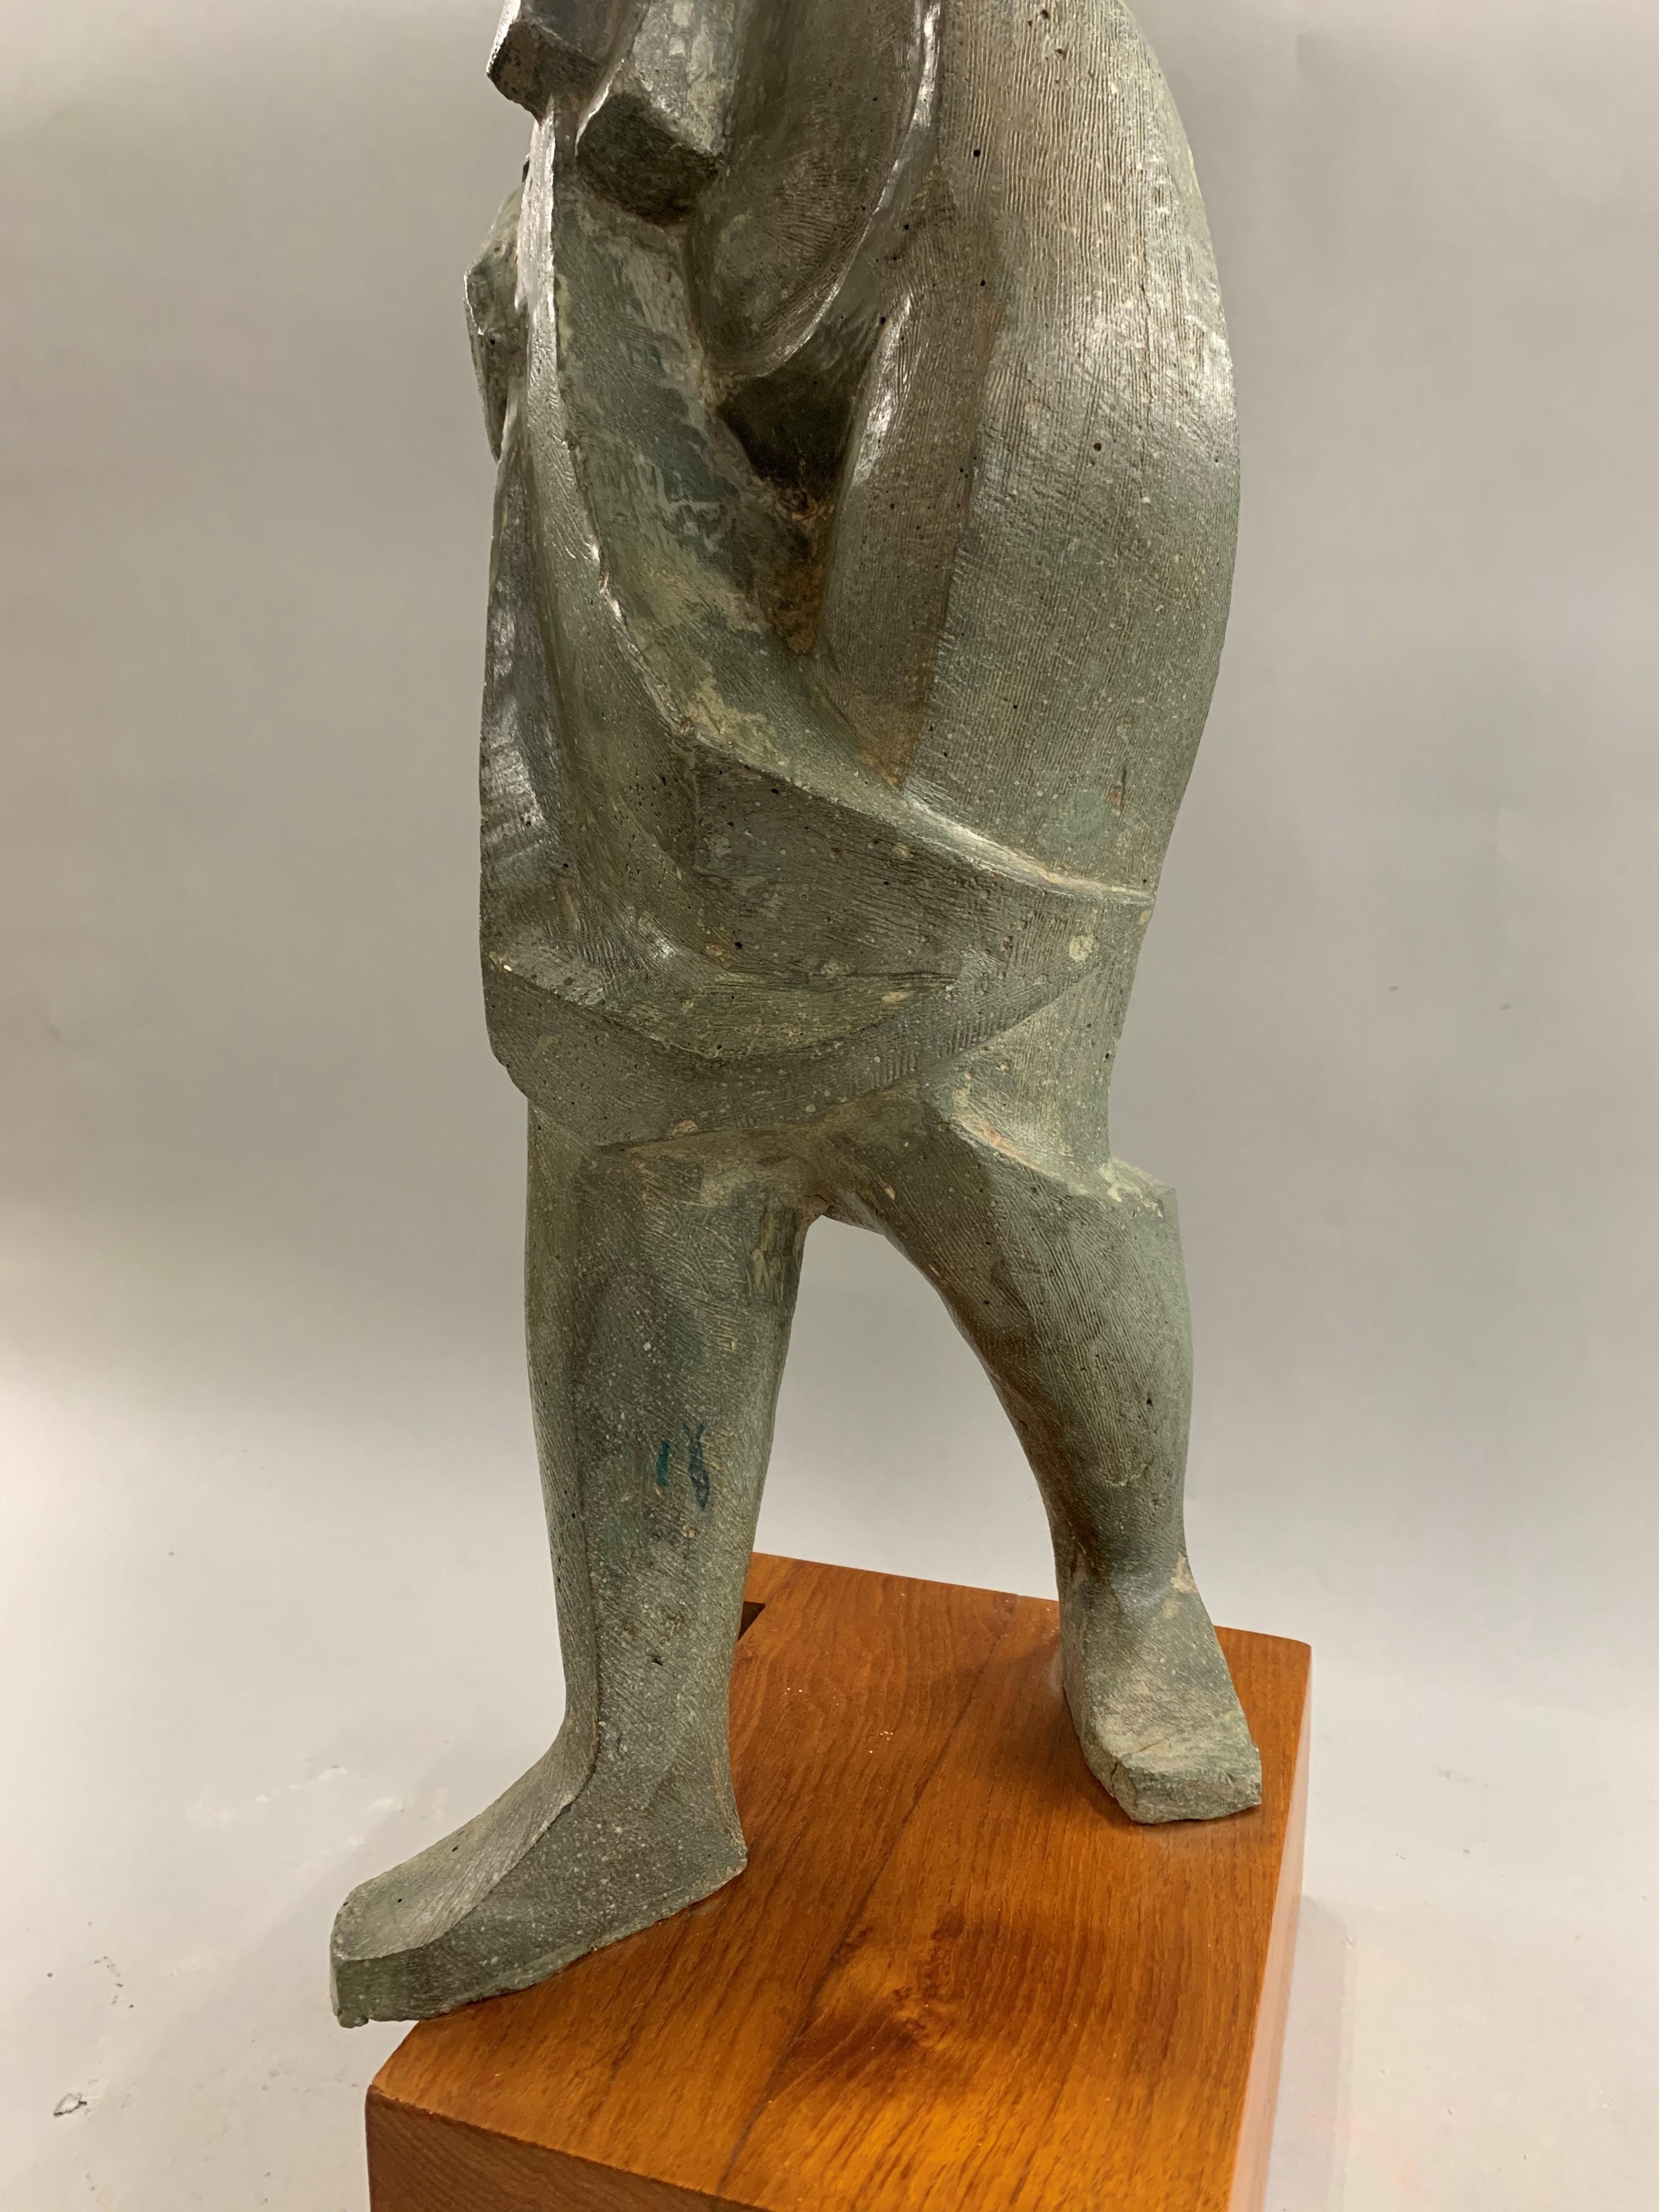 This impressionist sculpture of a woman walking was done by New Hampshire artist Robert Hughes (1915-2004). Hughes was born in Providence, Rhode Island and later moved to Berlin, New Hampshire, where he became well known as teacher for 43 years in